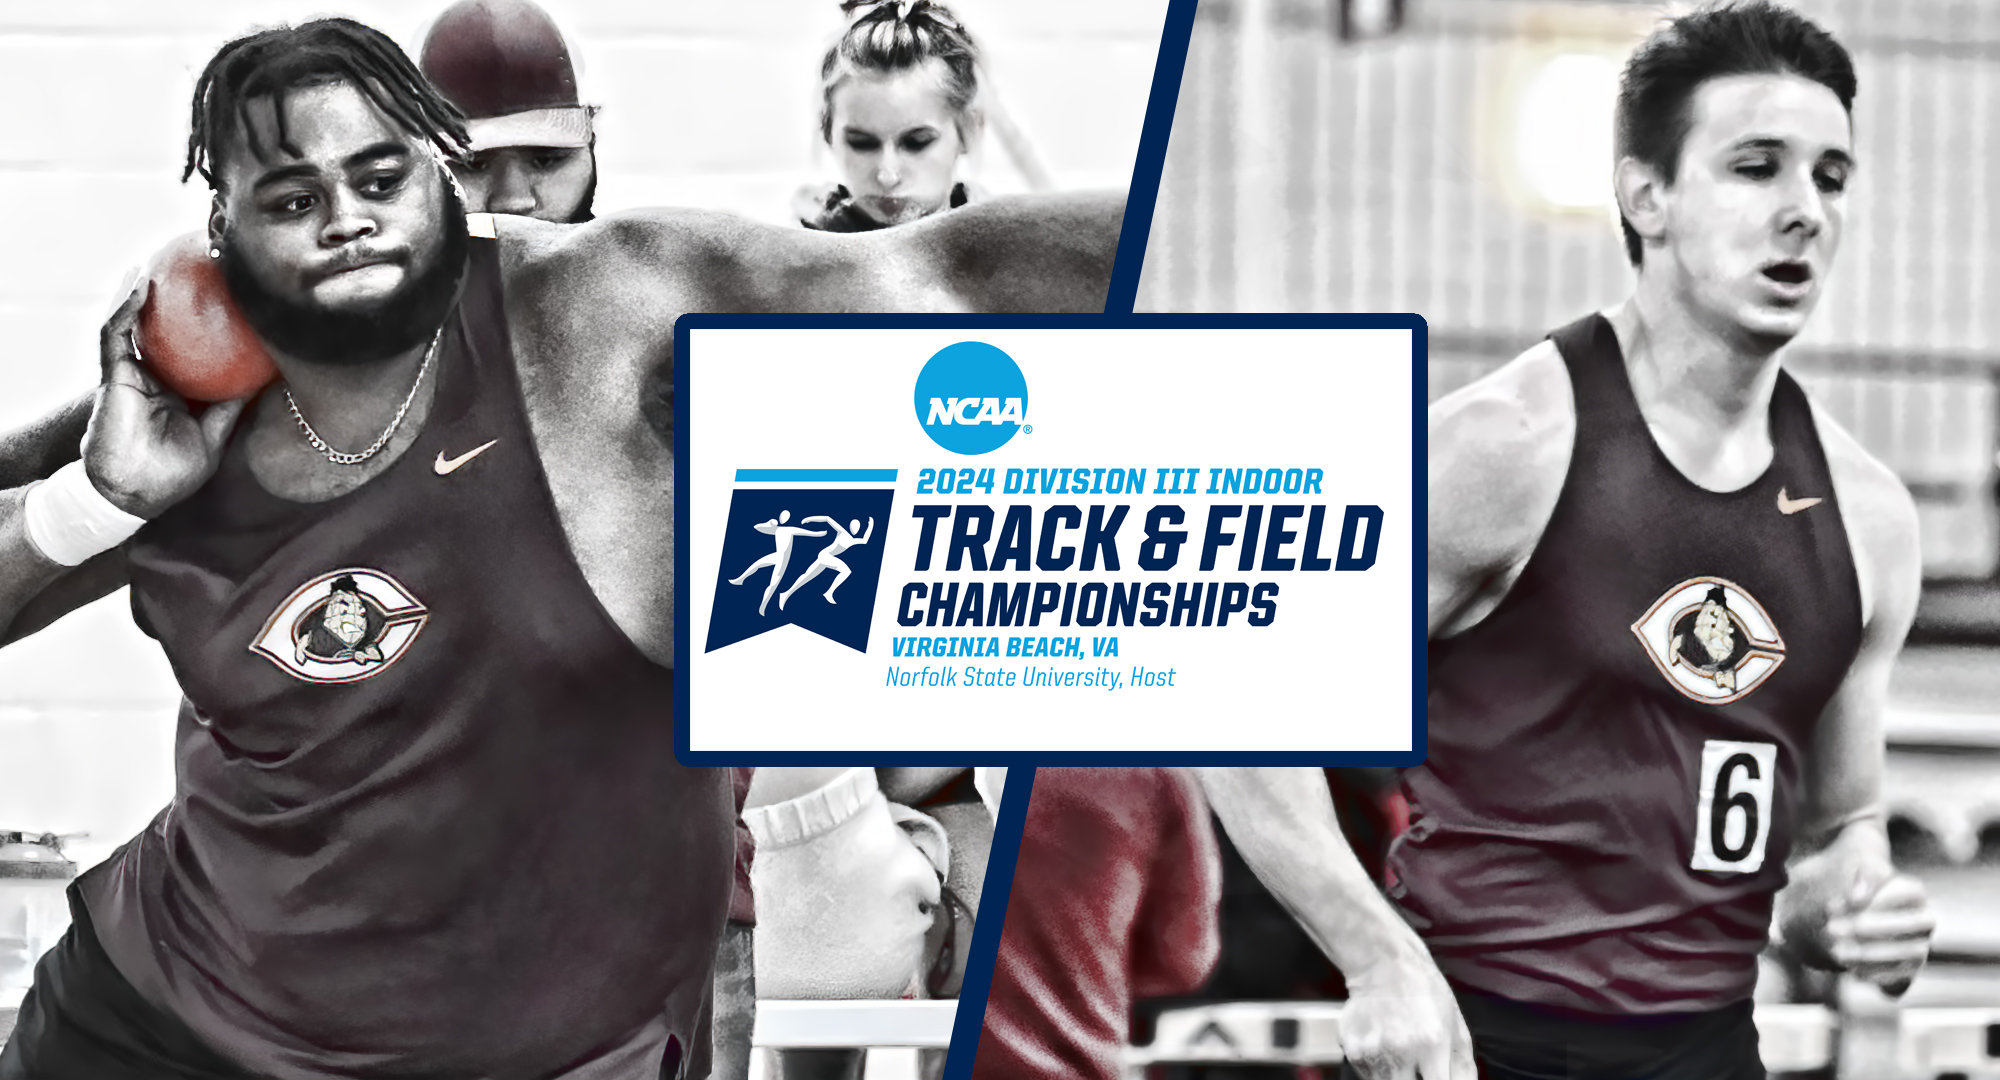 Cooper Folkestad and Wade Rhonemus have been officially entered into the NCAA National Track and Field Indoor Championship Meet.